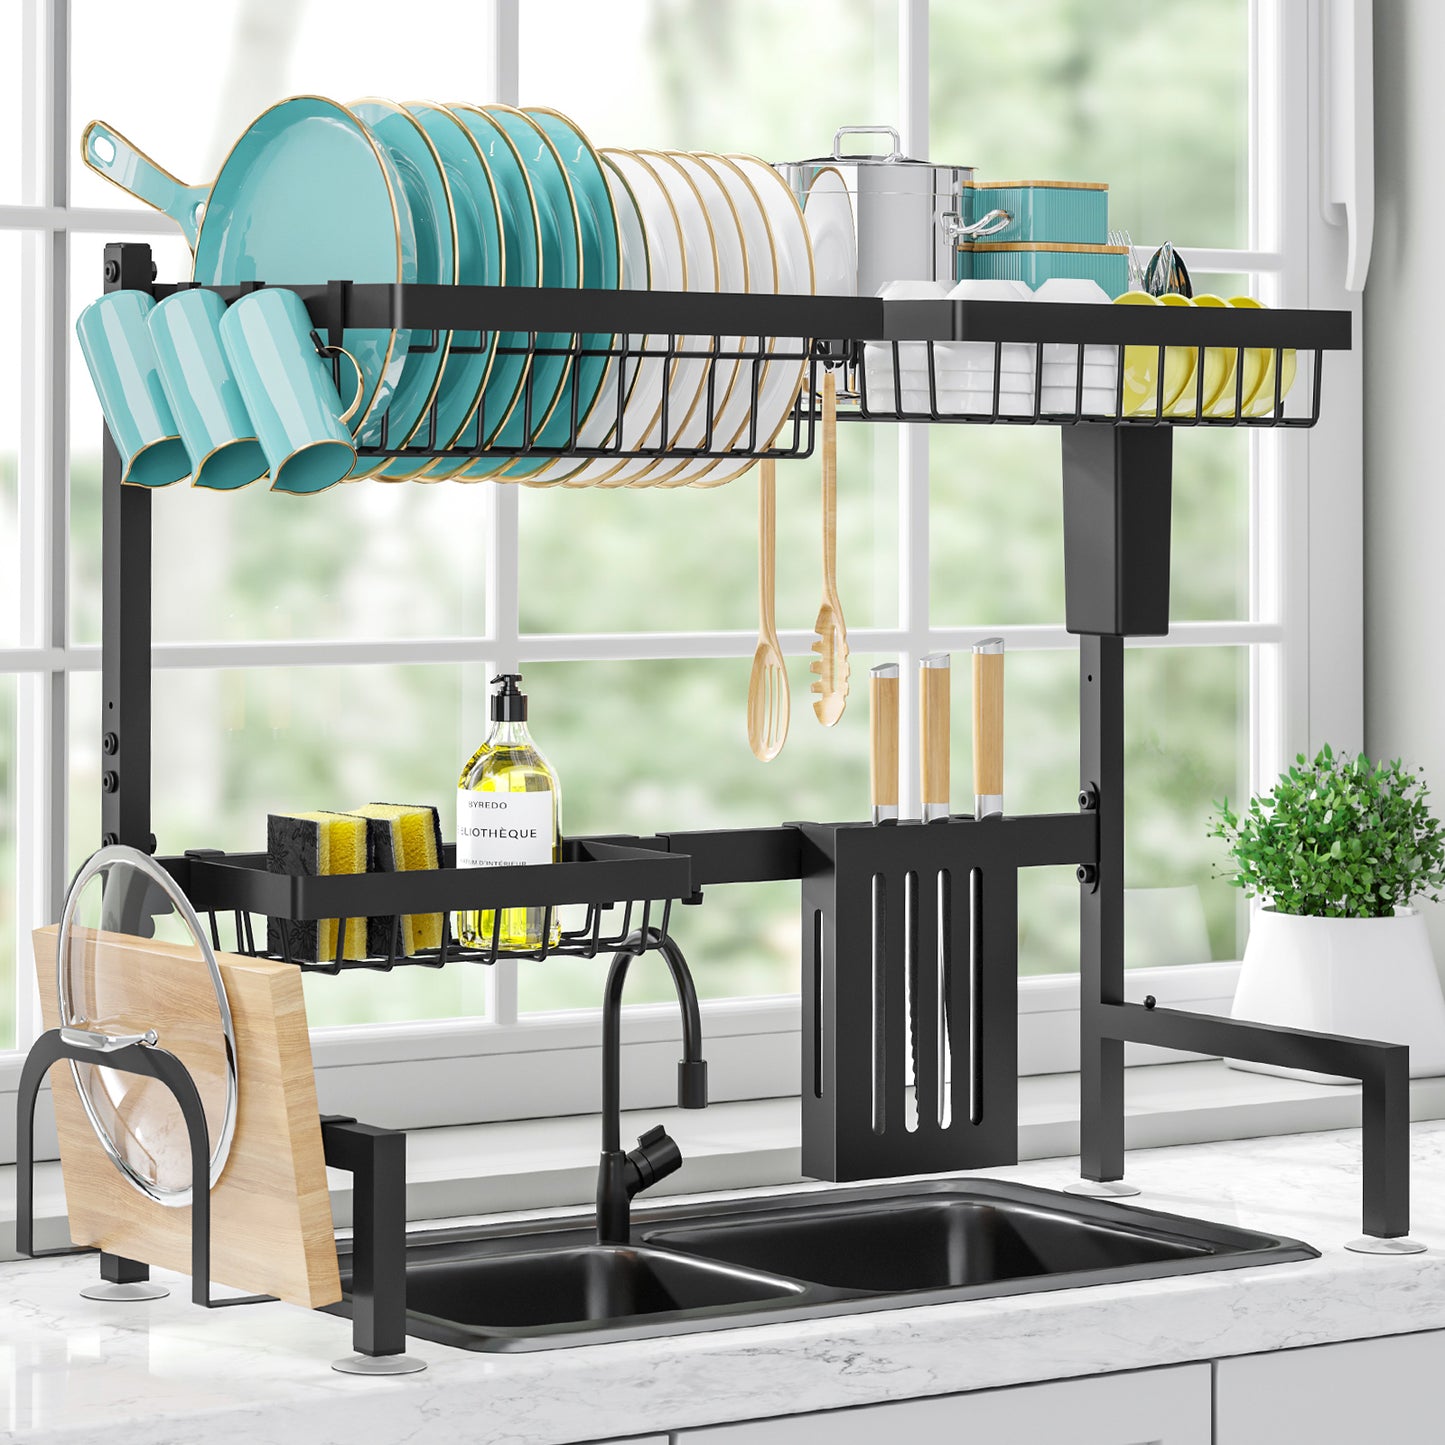 Dish Drying Rack - Large Over The Sink Dish Drainer Drying Rack (26.8" to 33.9" W), Large Capacity Stainless Steel Dish Rack, Multifunctional Kitchen Organizers and Storage Rack, Black